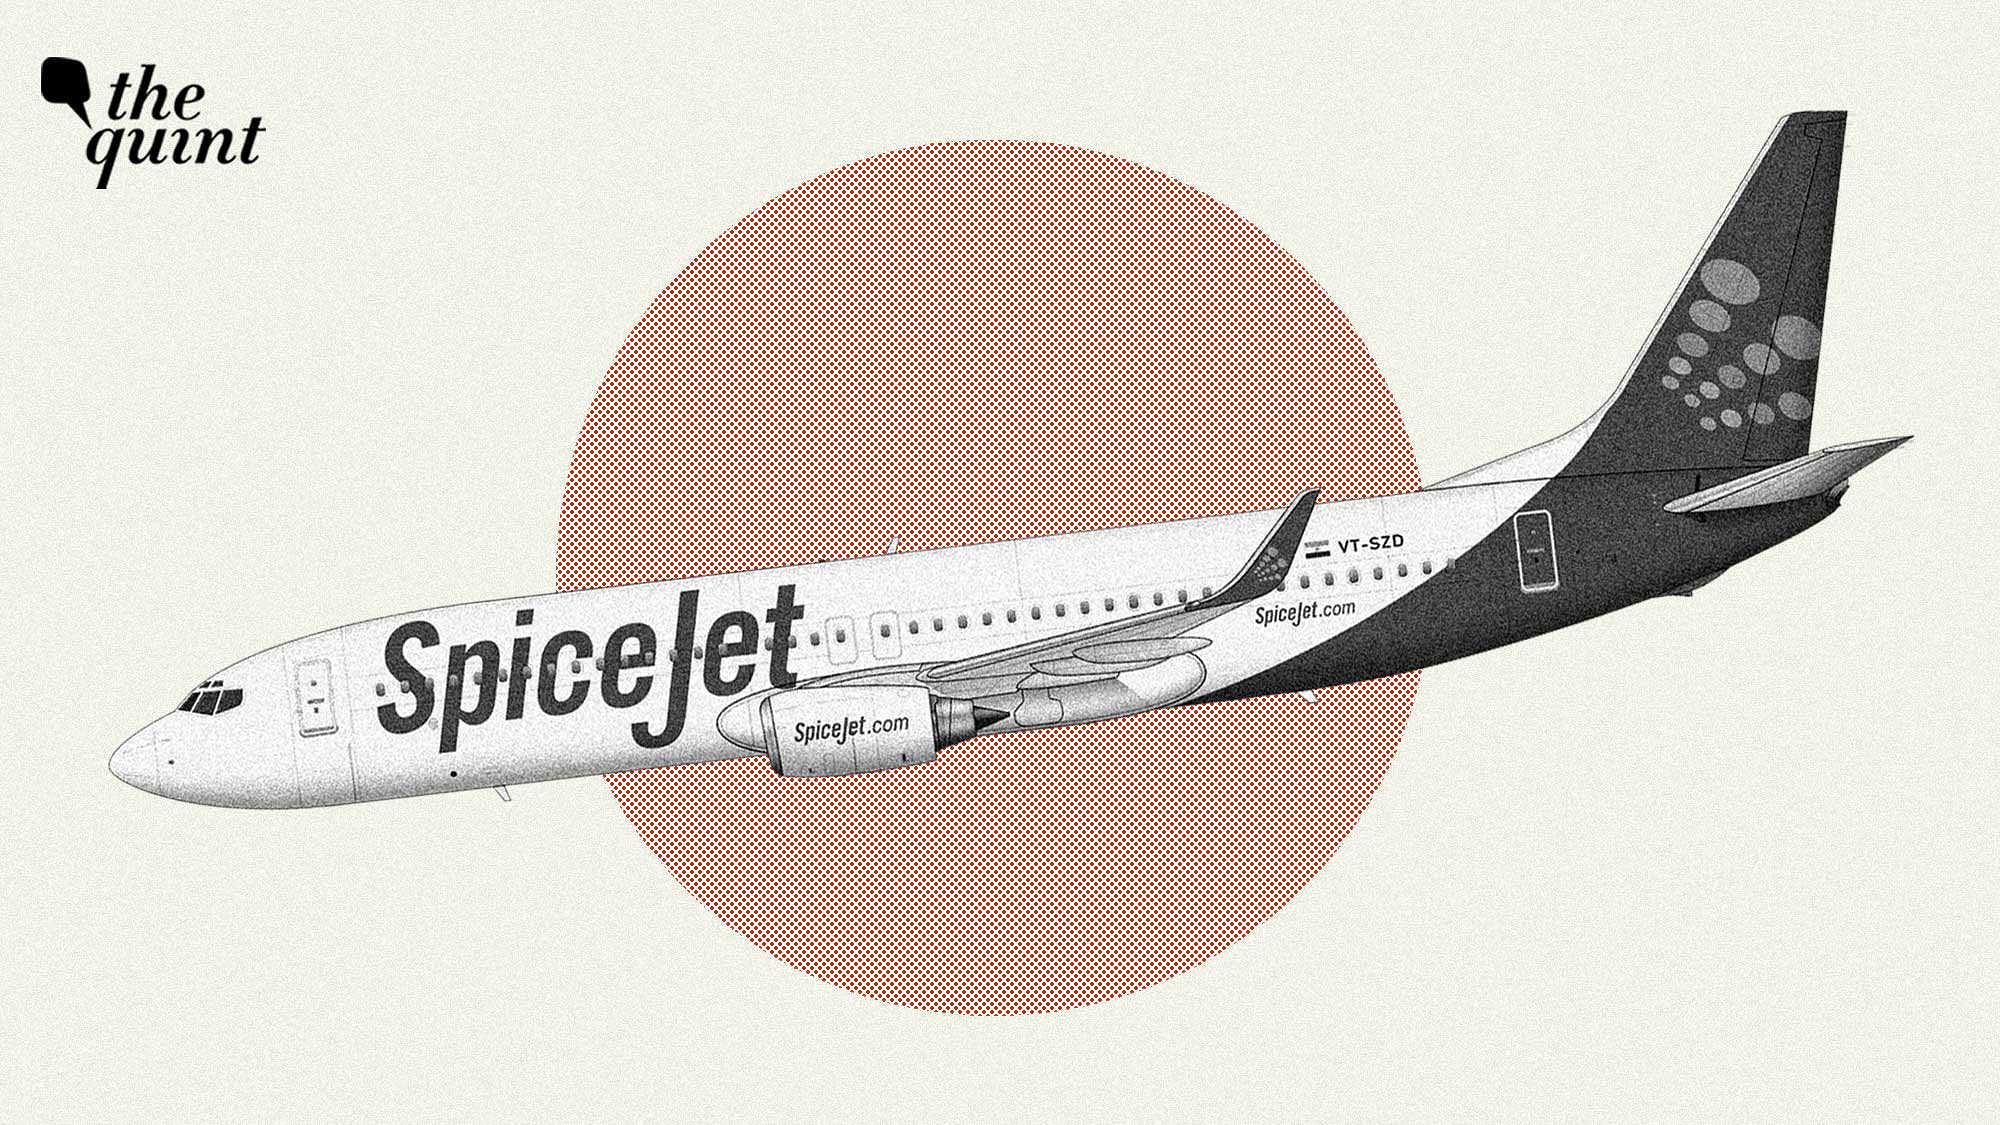 <div class="paragraphs"><p>From financial crunch to DGCA oversight, experts weigh in on what's led SpiceJet to its recent turbulent fate.</p></div>